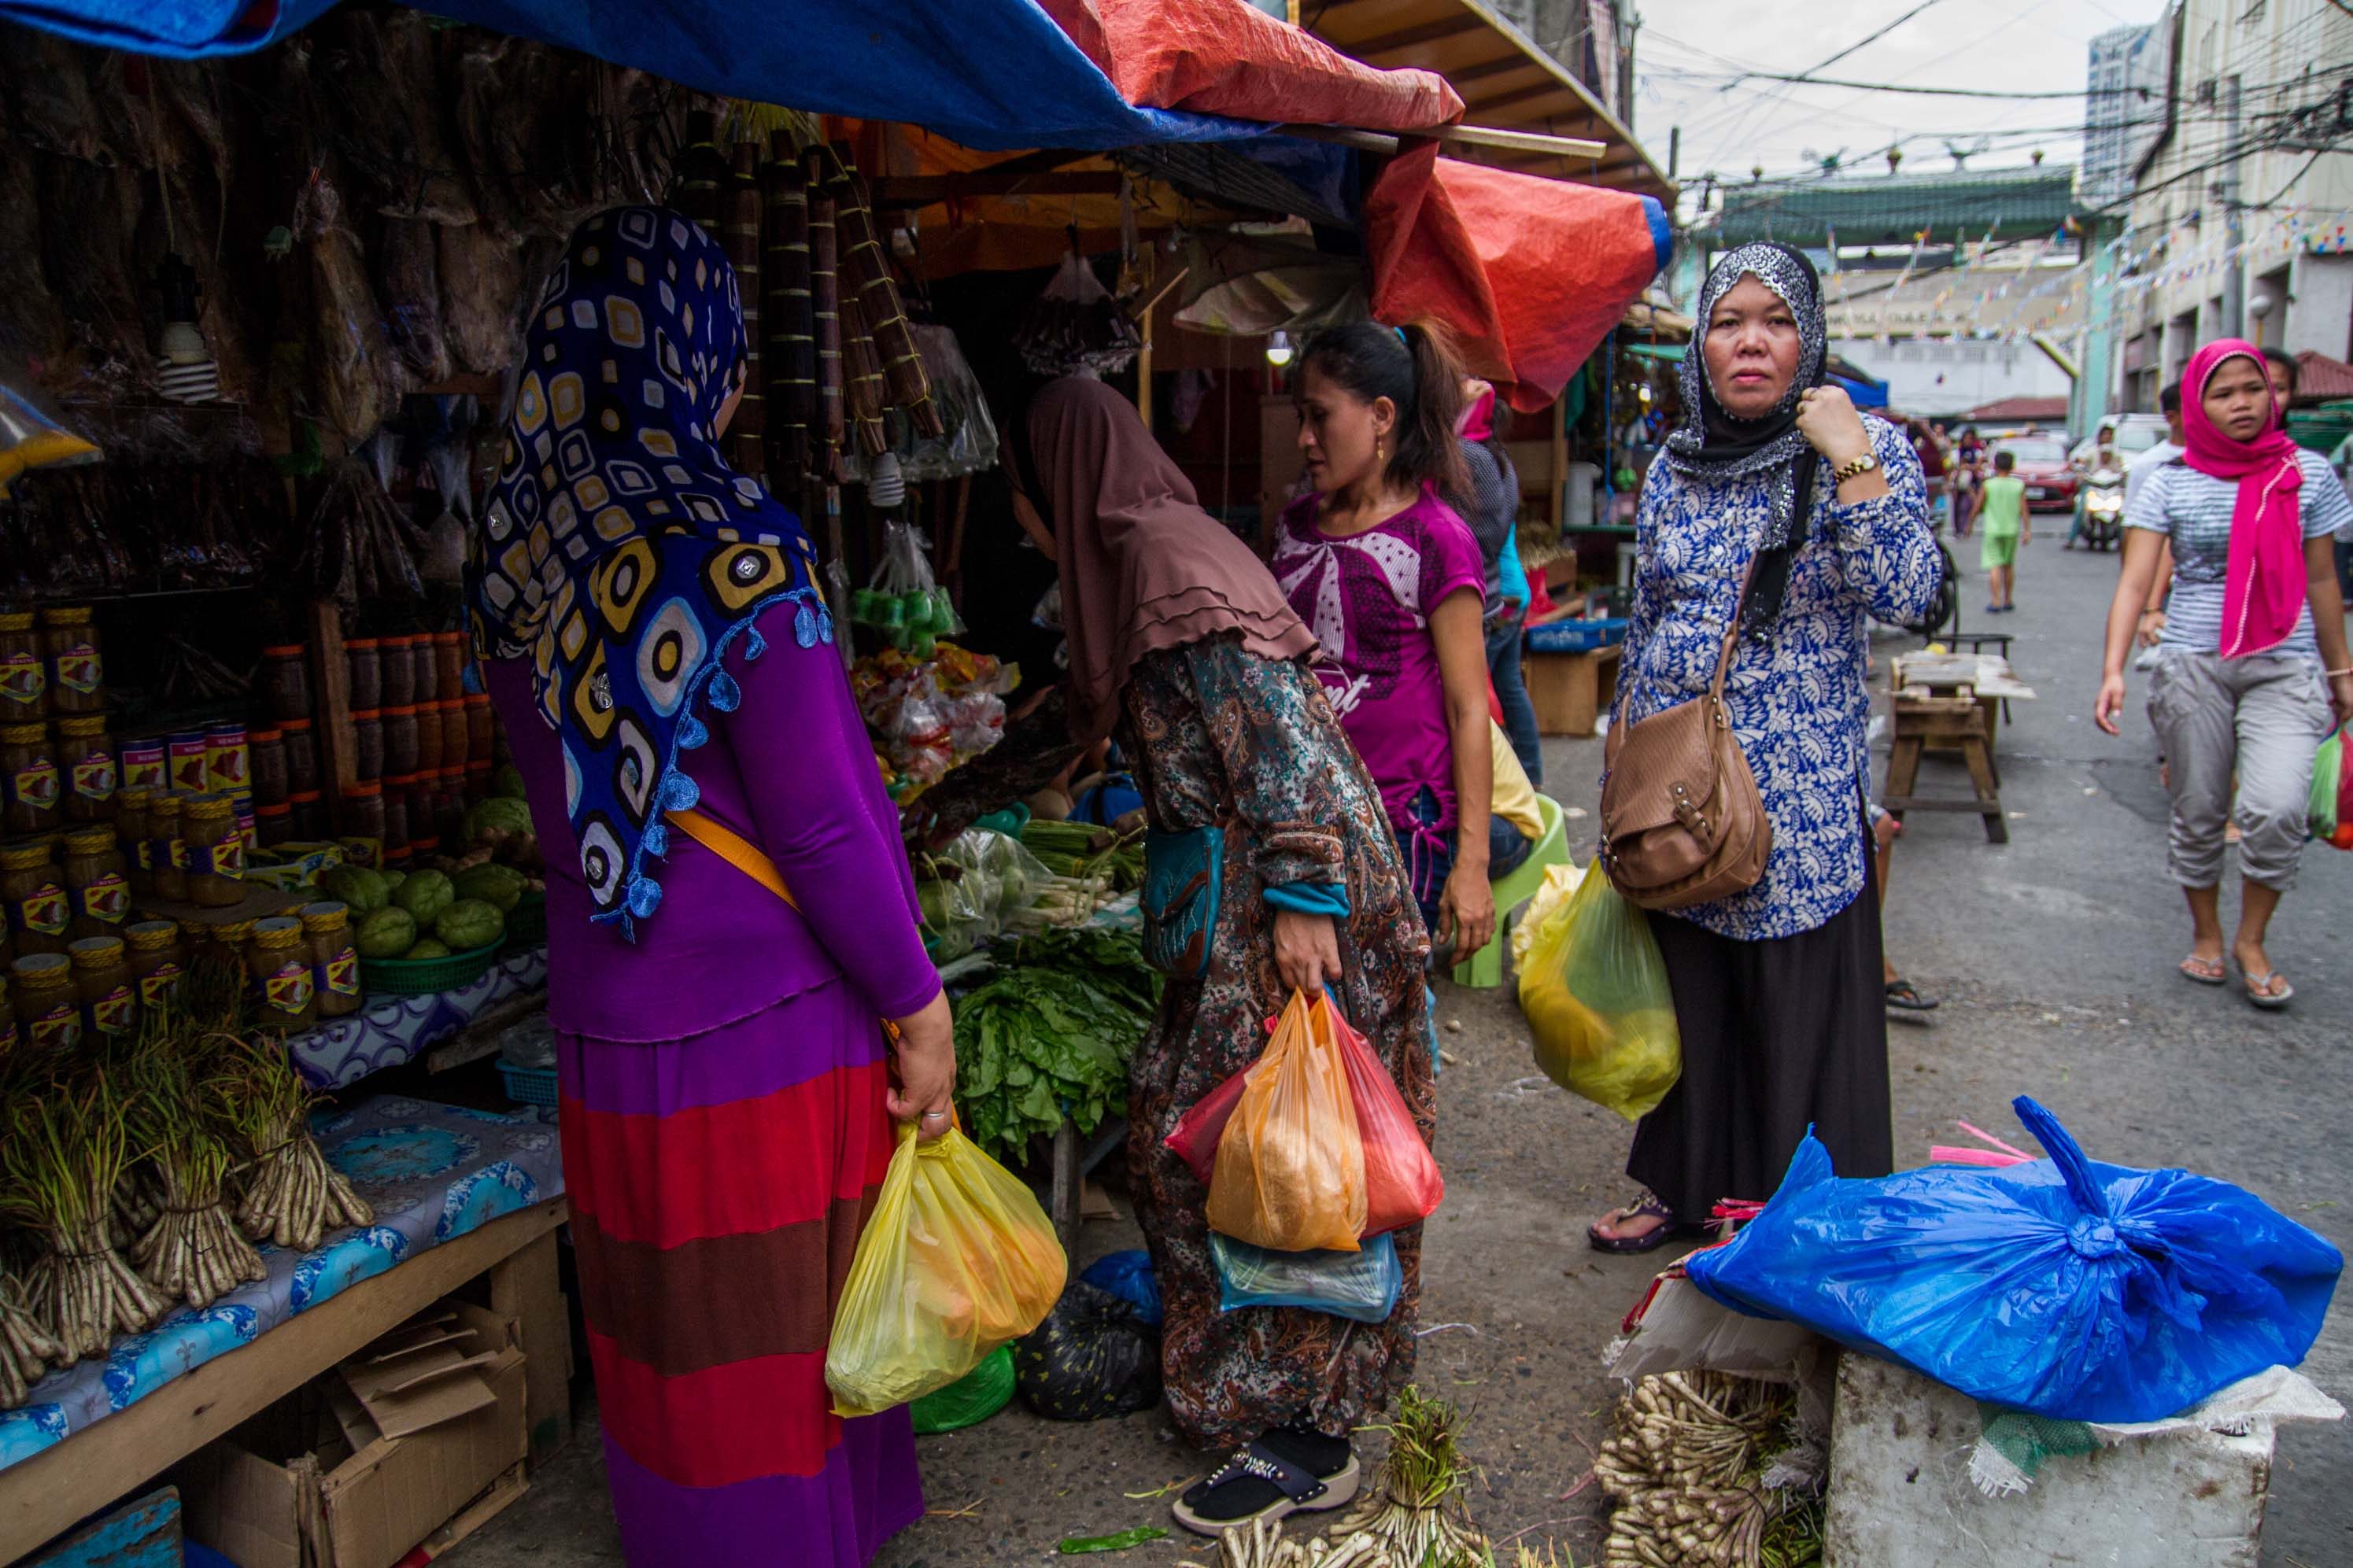 AFTER 6PM. Muslim women buy food to be served after 6 in the evening, the time they are allowed to eat during Ramadan.  